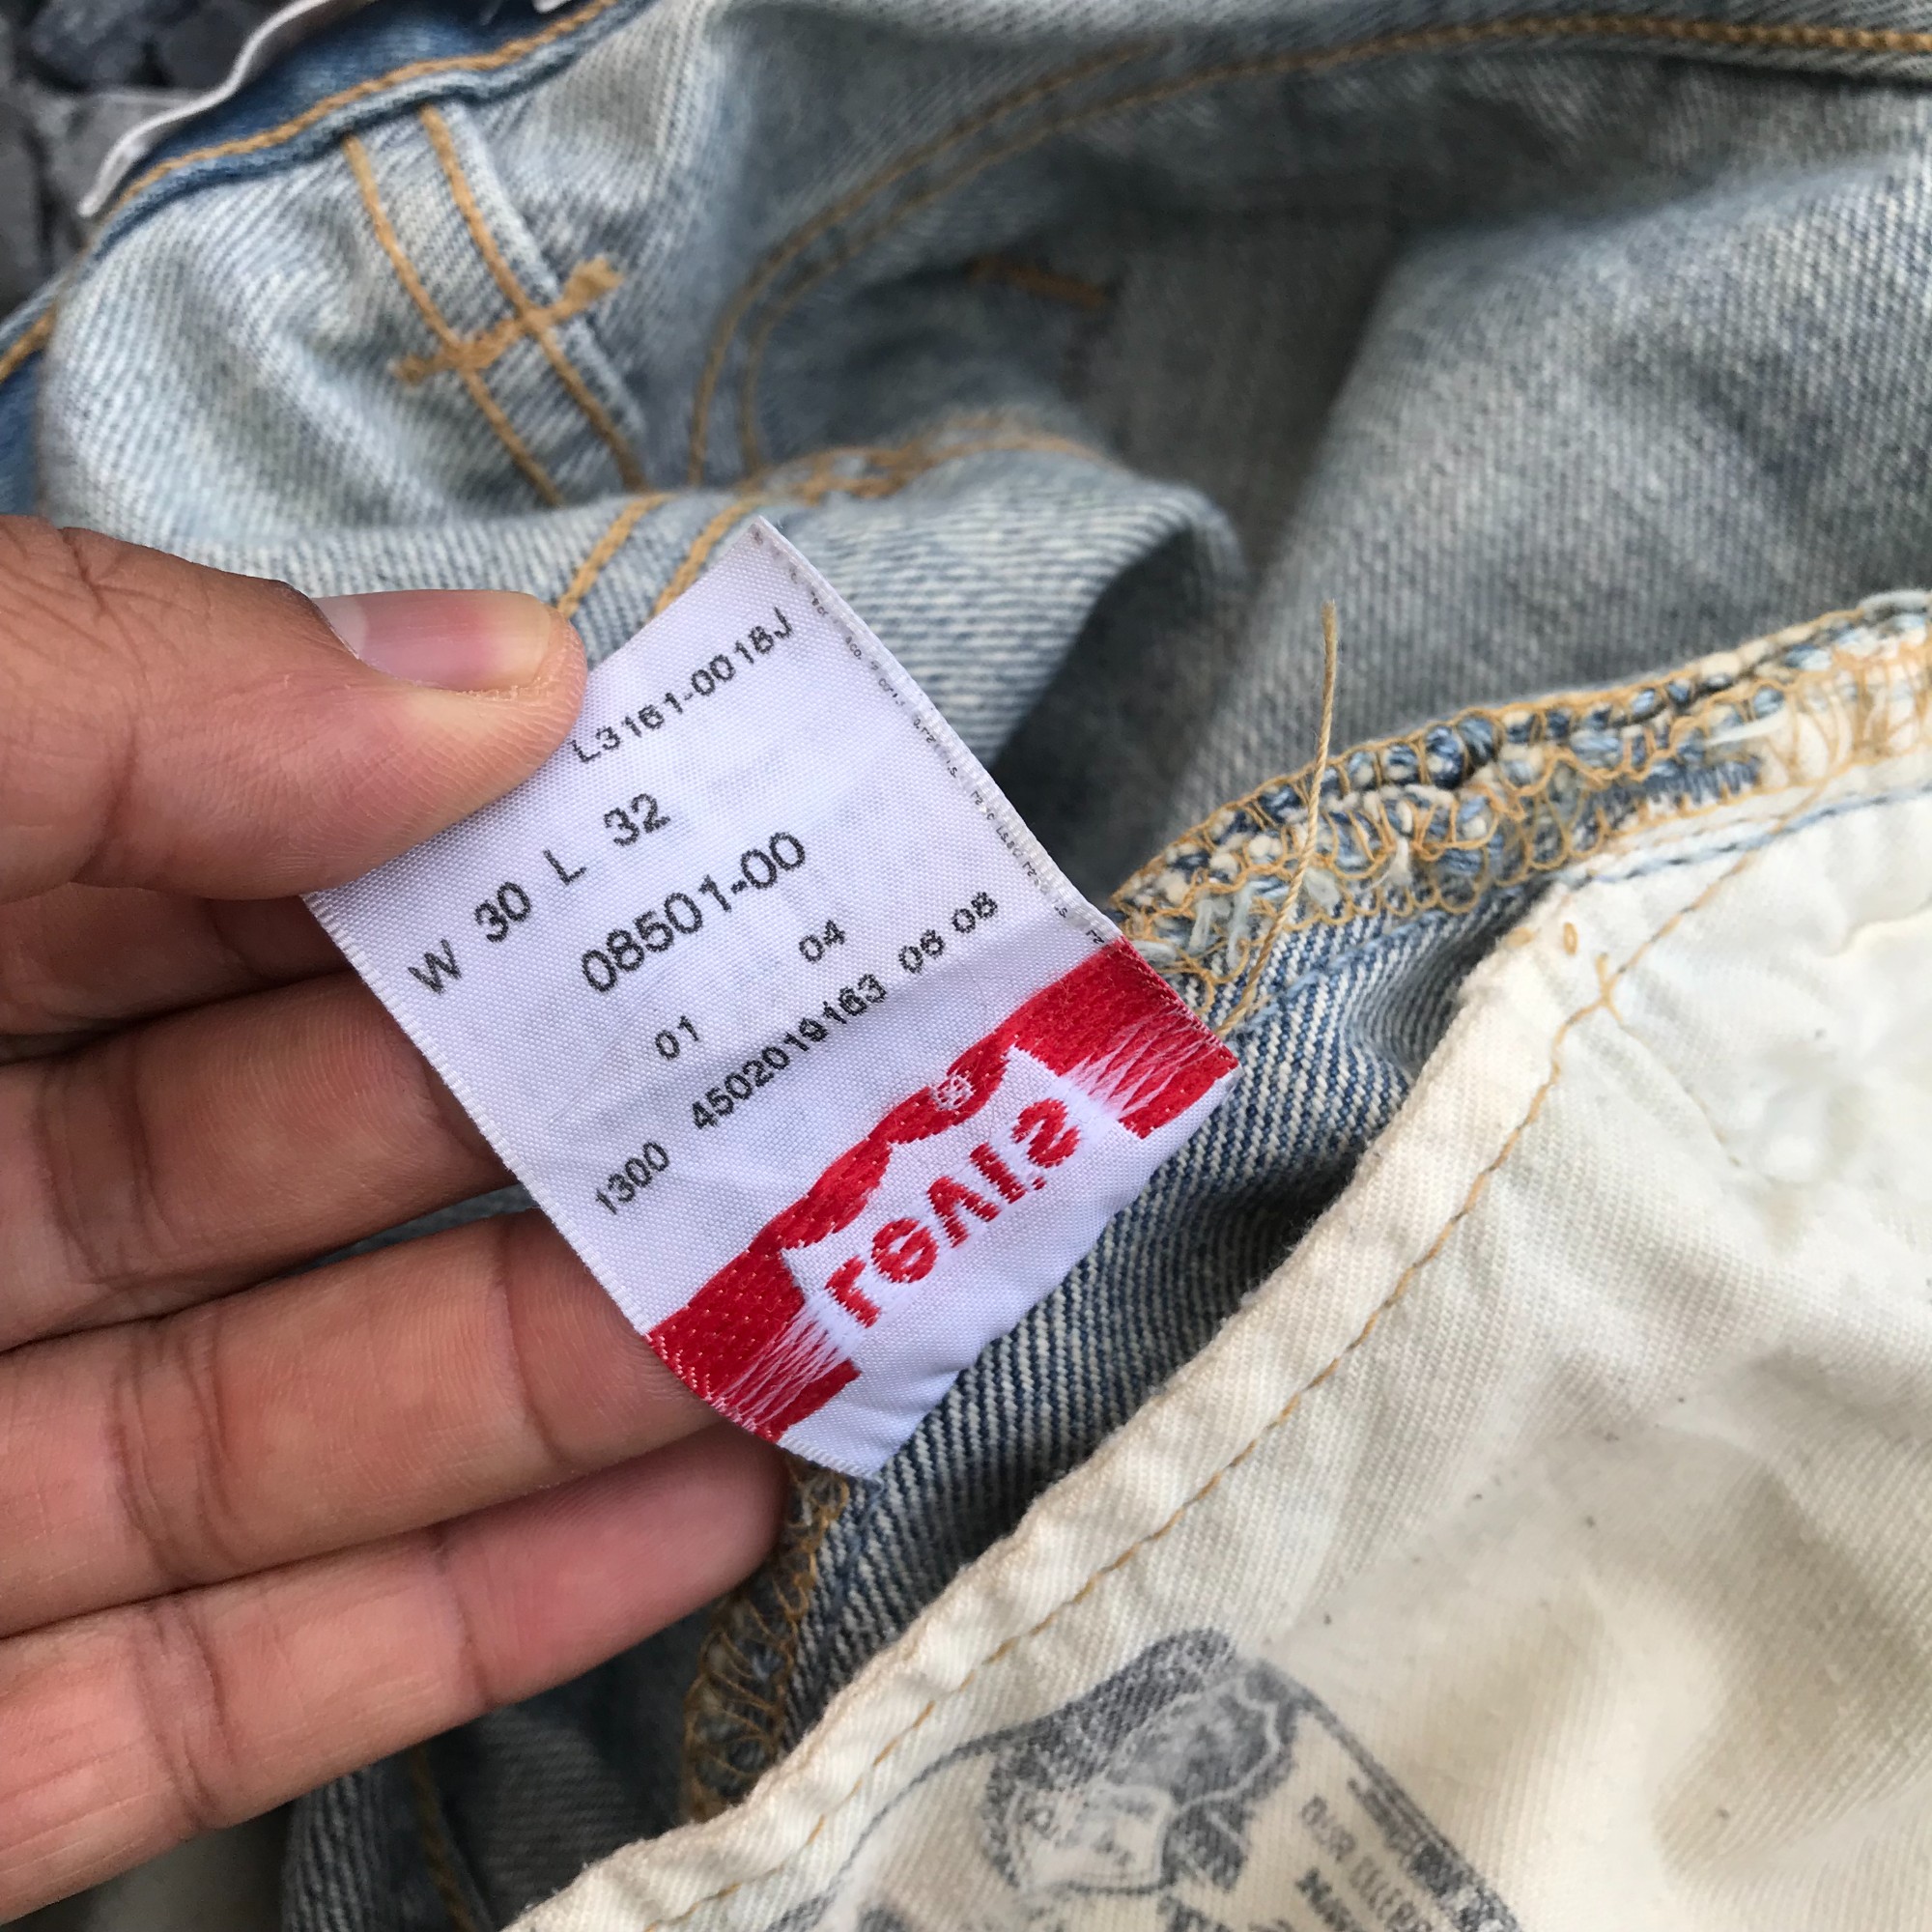 Vintage Levis 501 faded Distressed denim Waist 30x32 inch trashed ripped kurt cobain style - 6